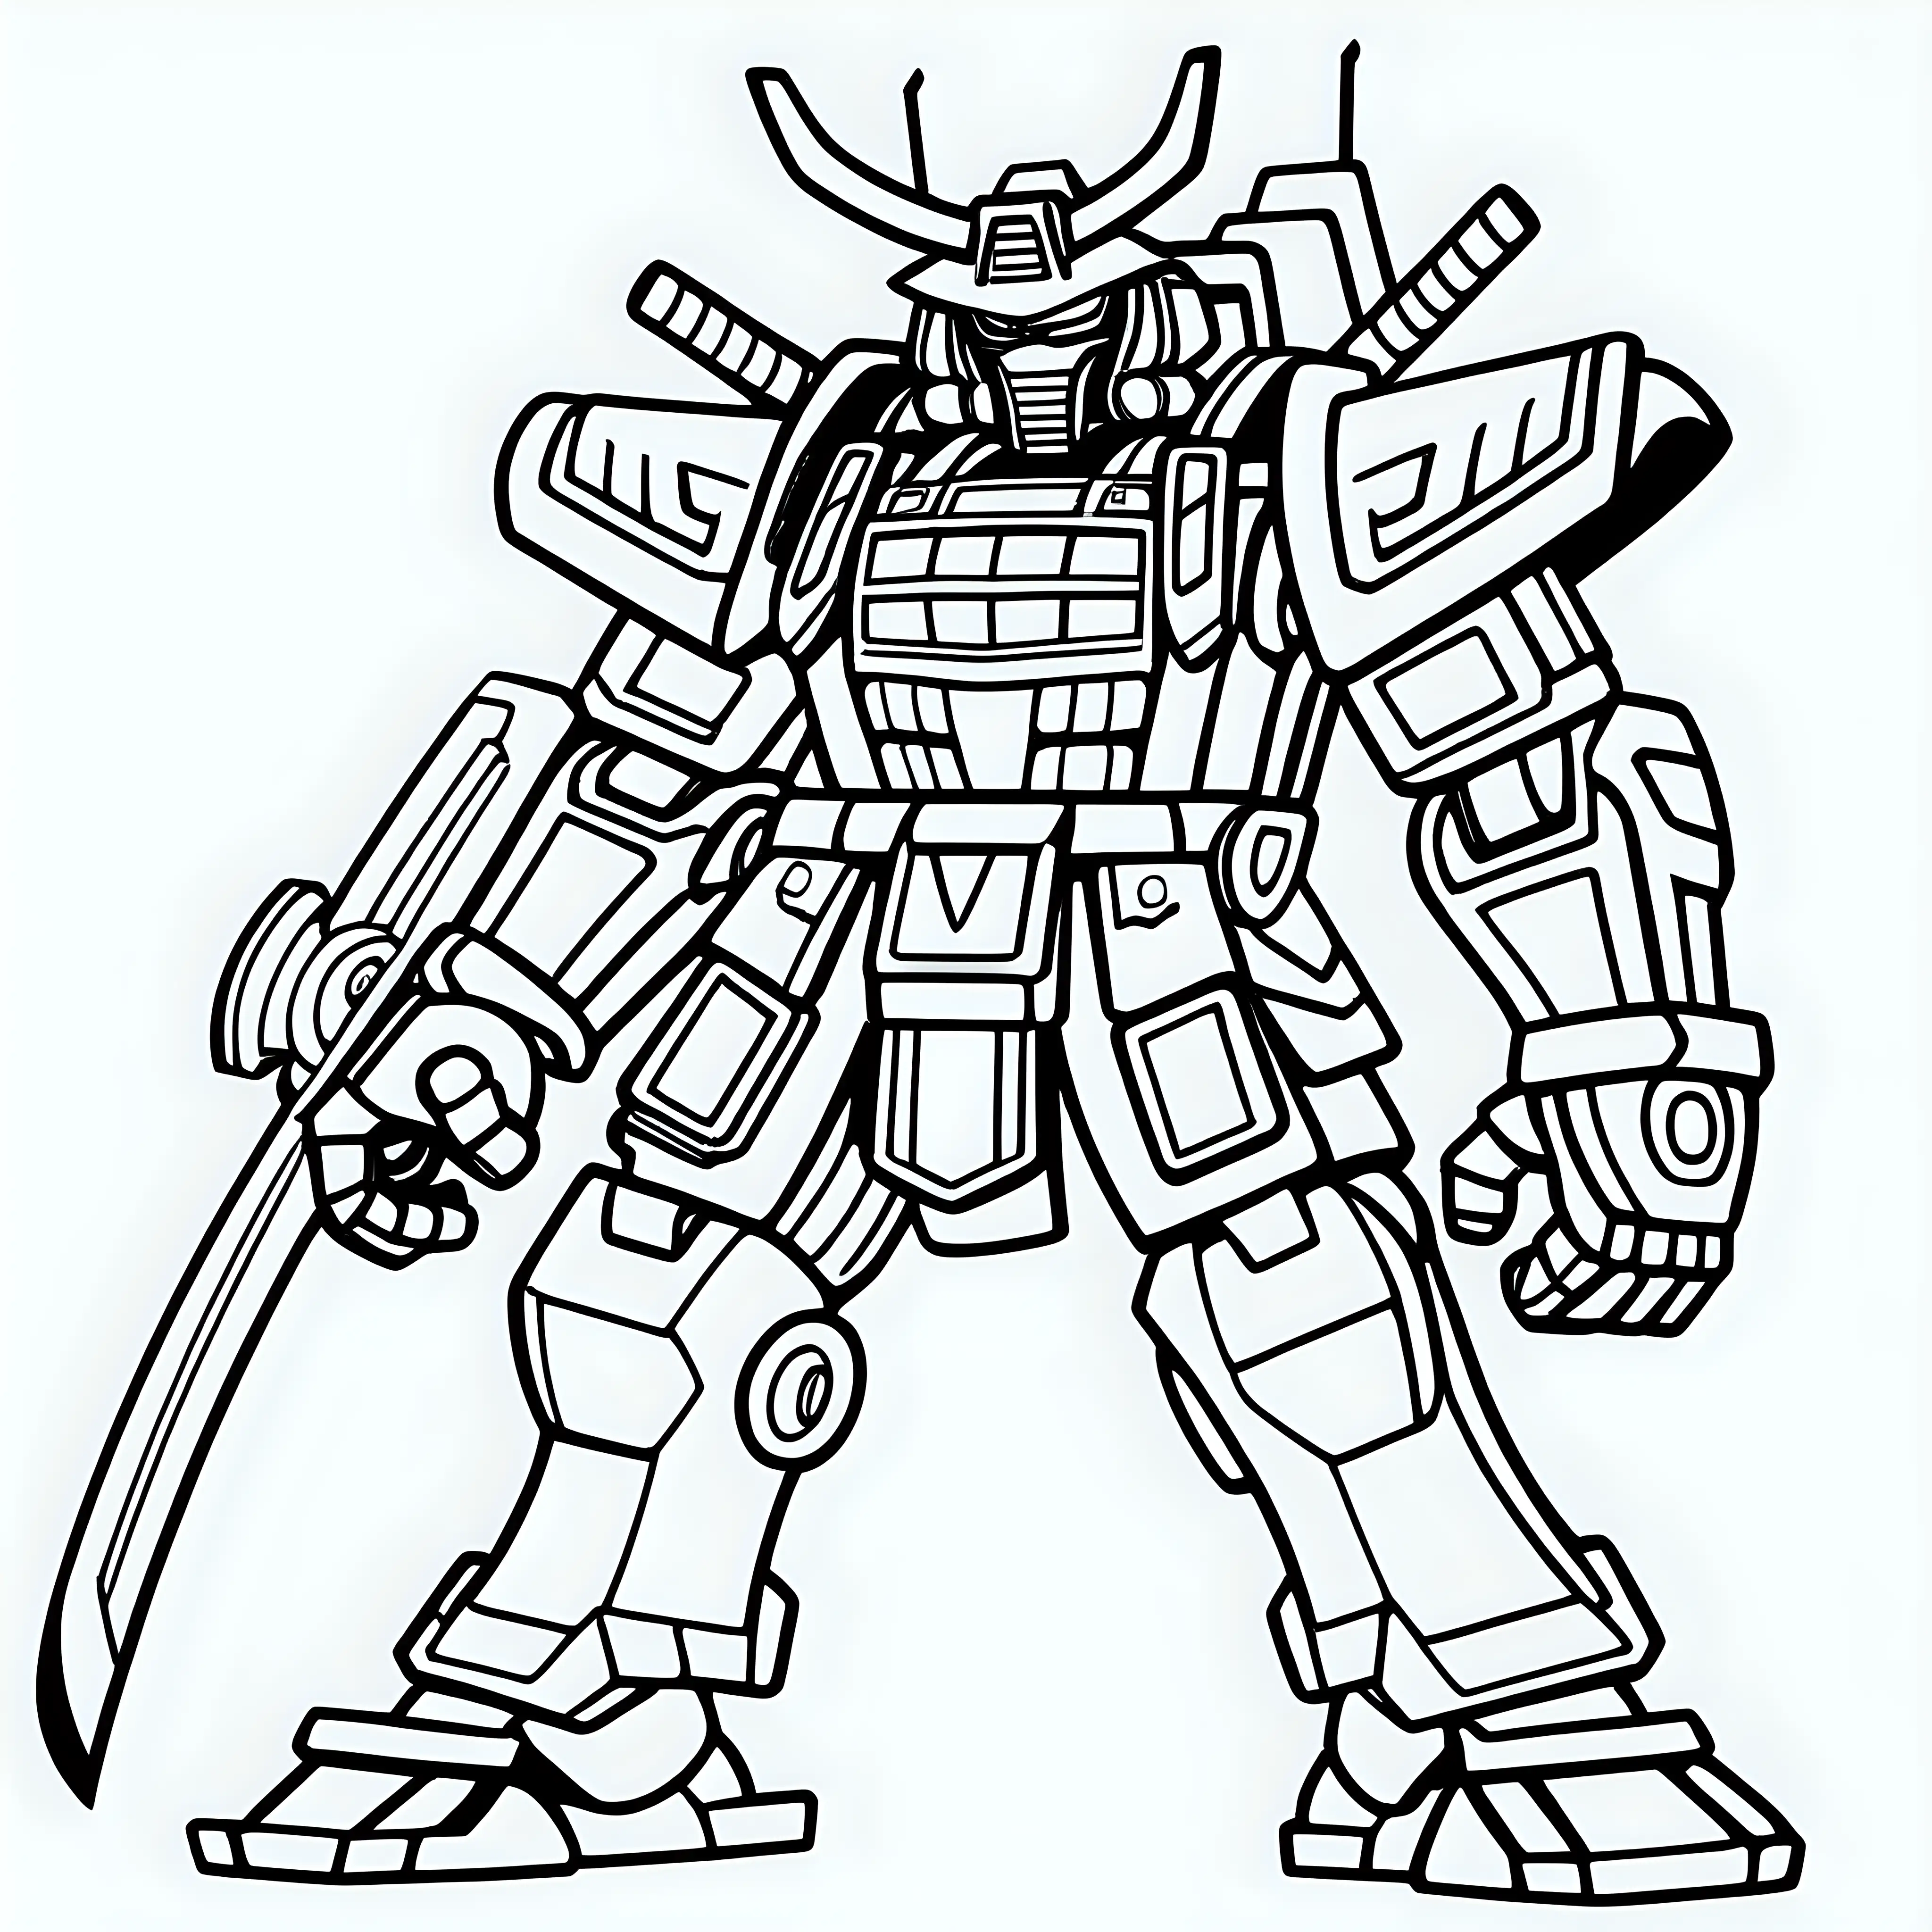 Mech Samurai Cartoon Coloring Page for Kids Bold Outlines Black and White Design